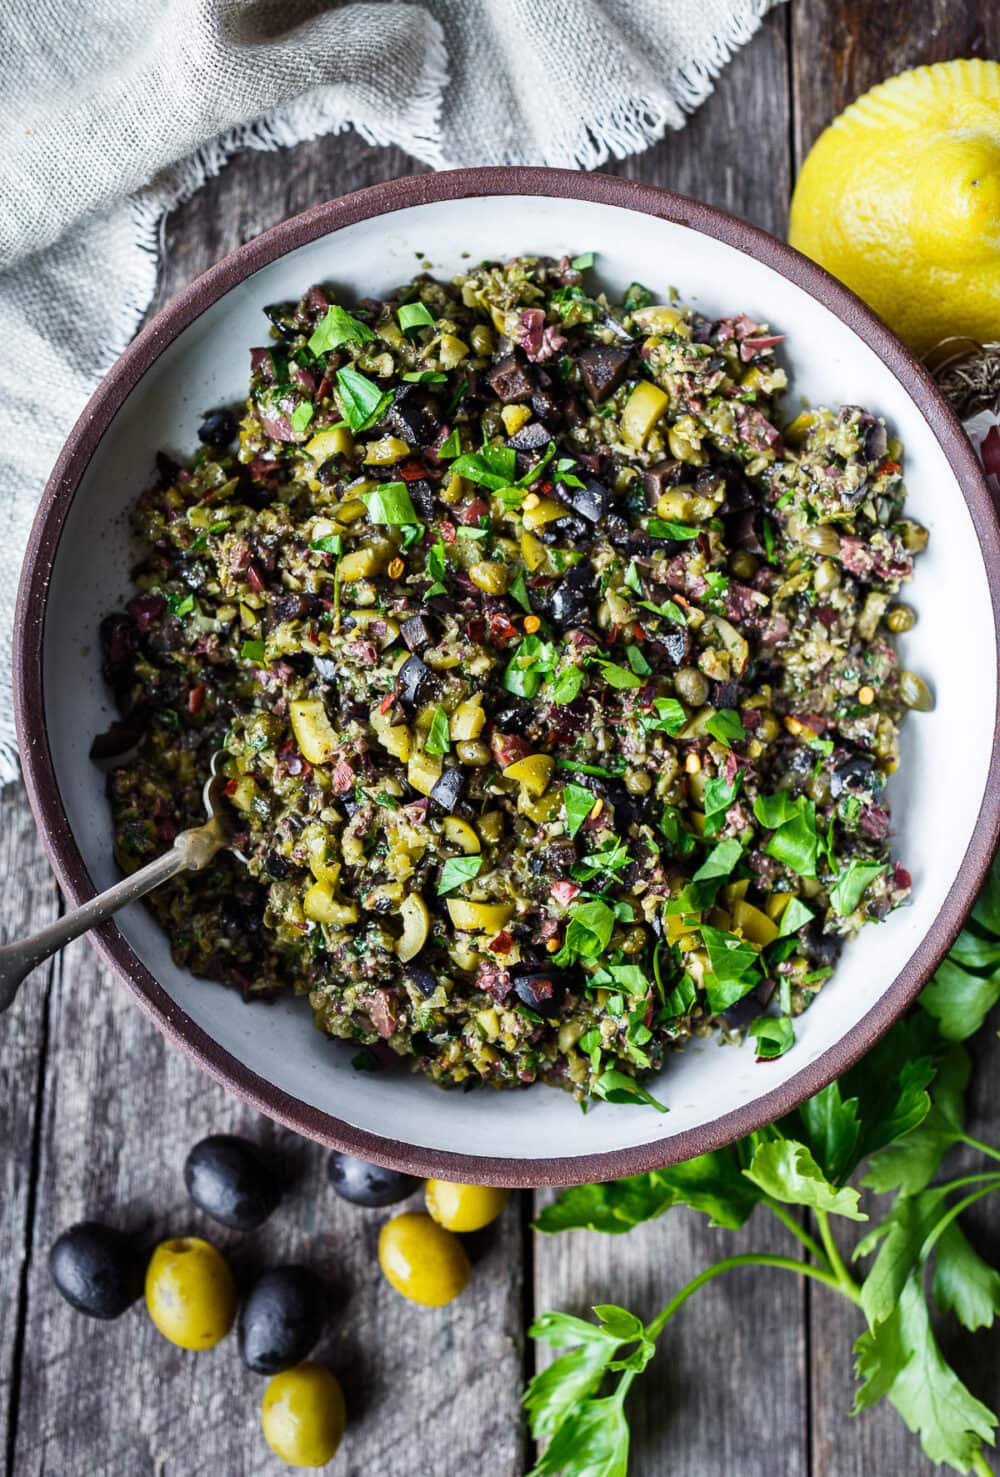 Versatile and full of flavor, Olive Tapenade is a simple, elegant addition to your appetizer list.  This tasty spread comes together fast and requires no cooking, making it a great choice for warm summer days.  